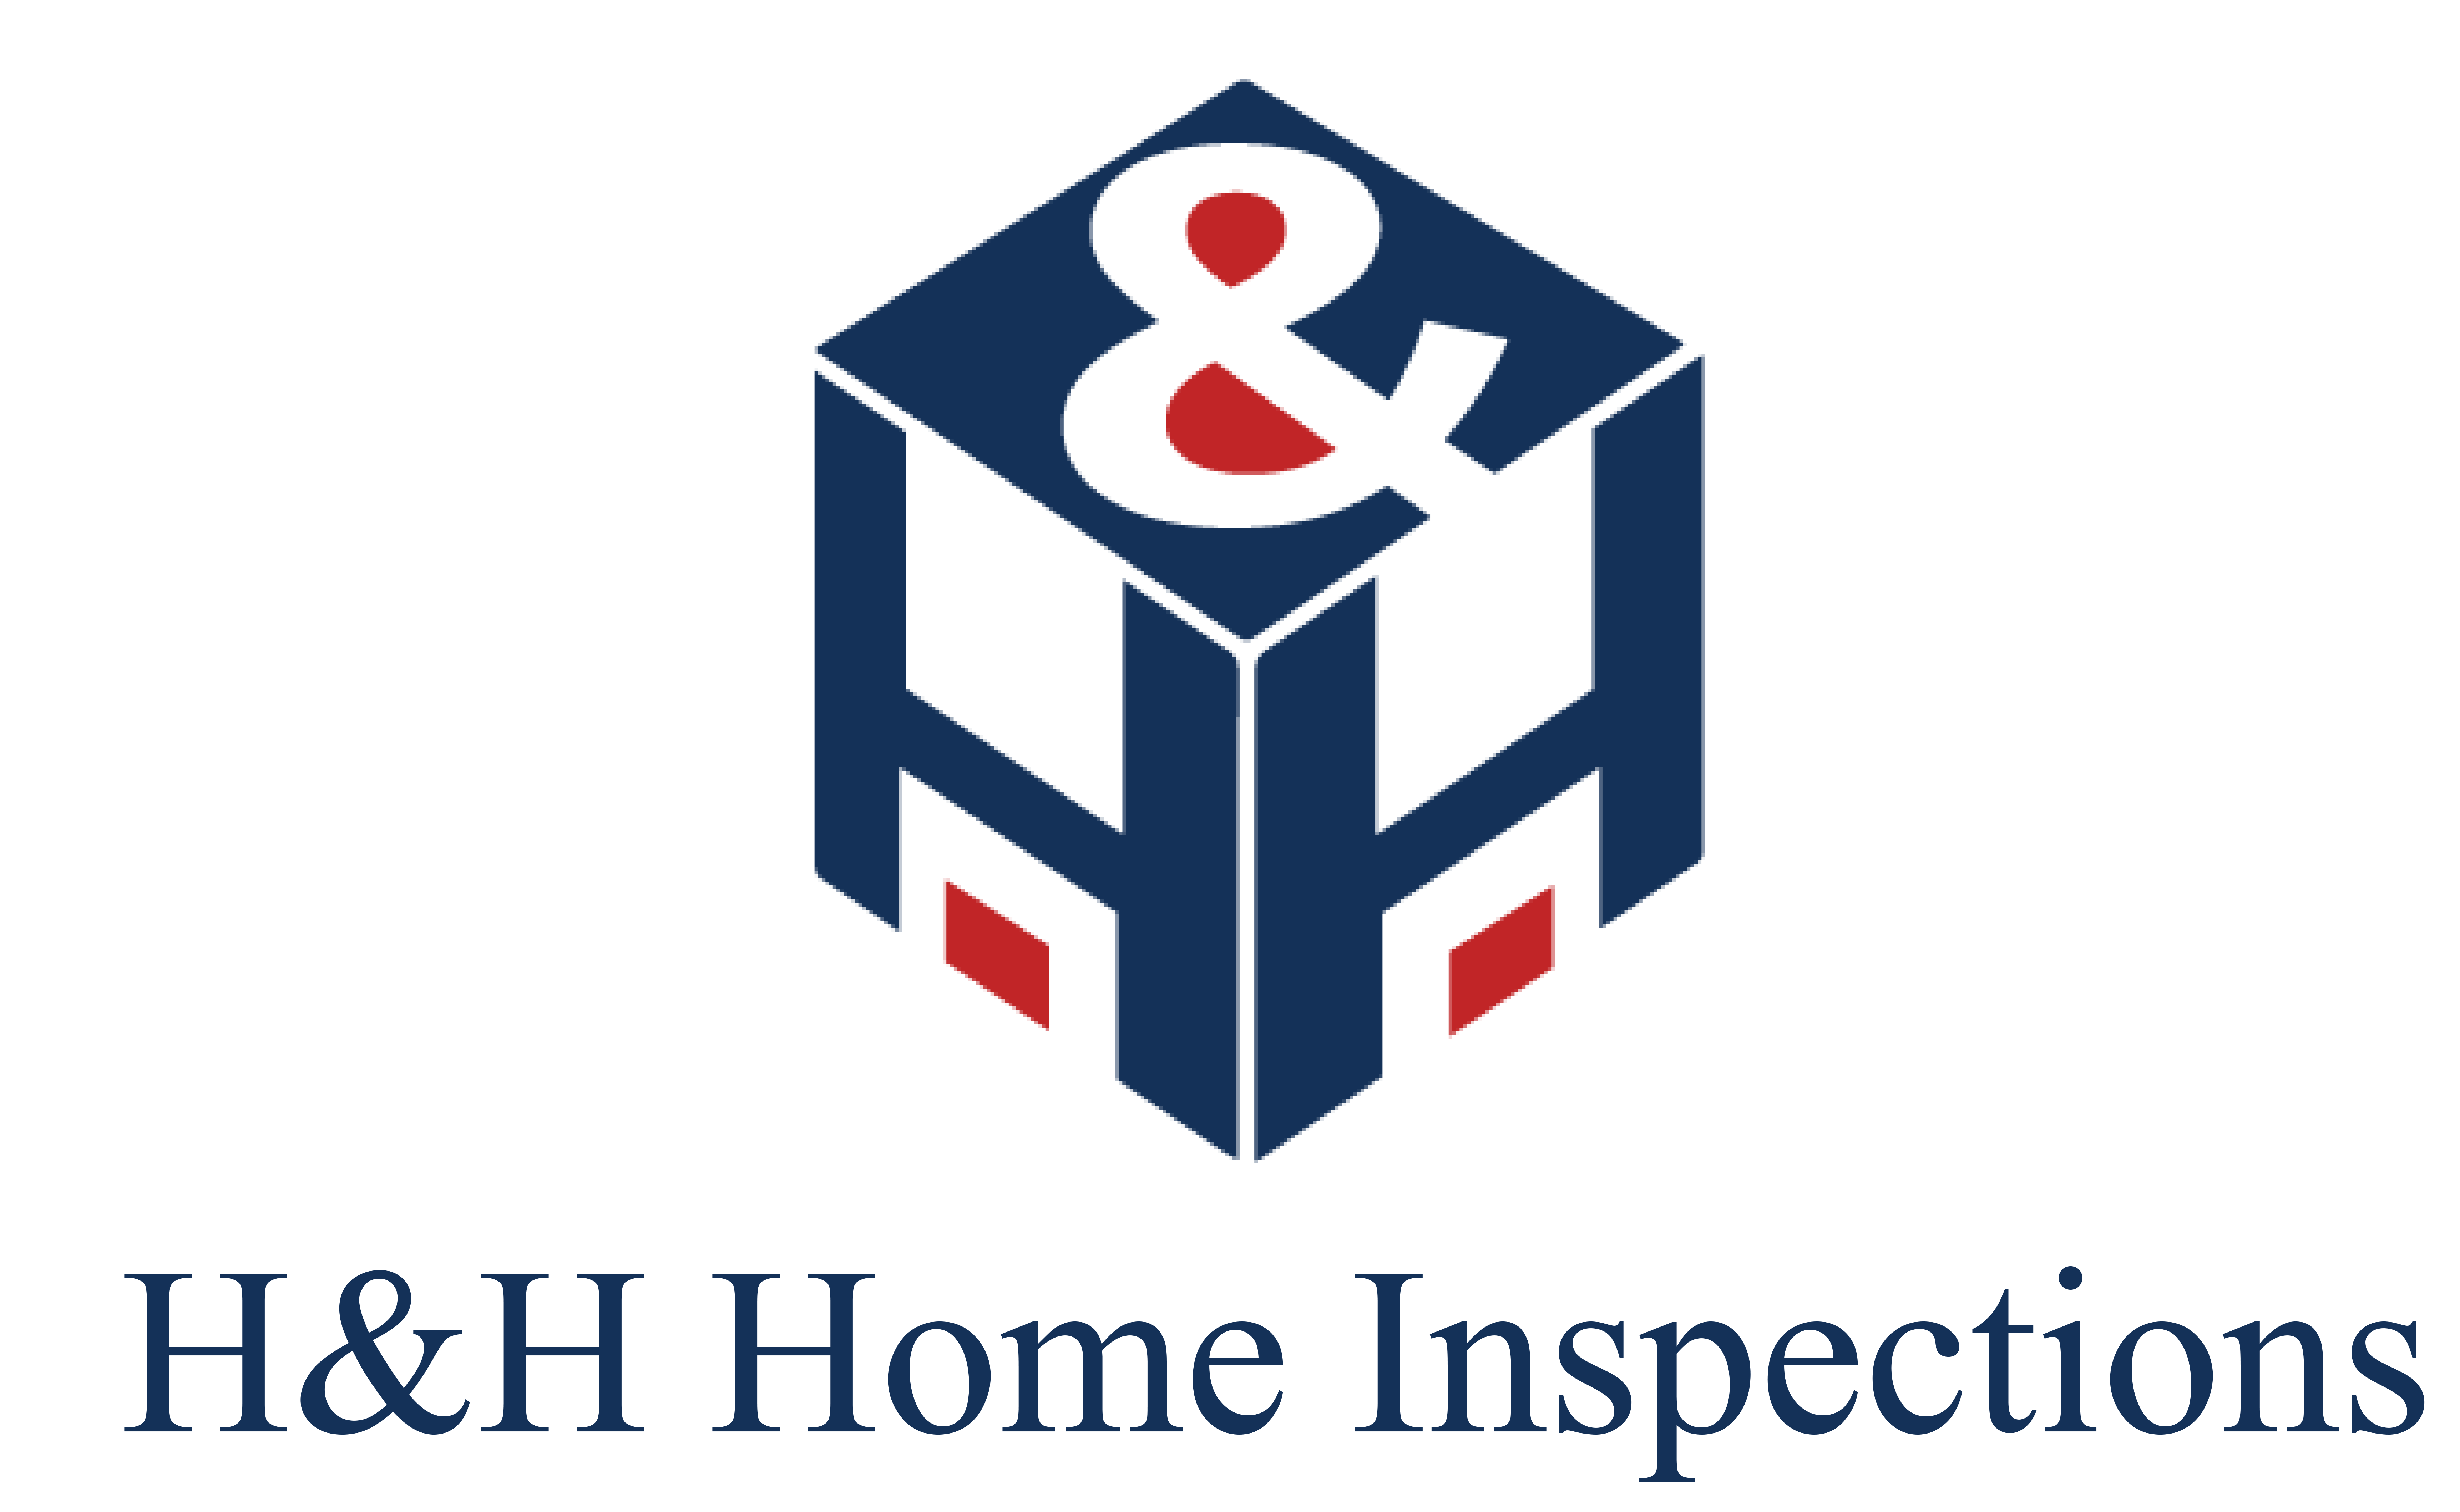 HH Logo - H&H Home Inspections – Professional Home Inspectors